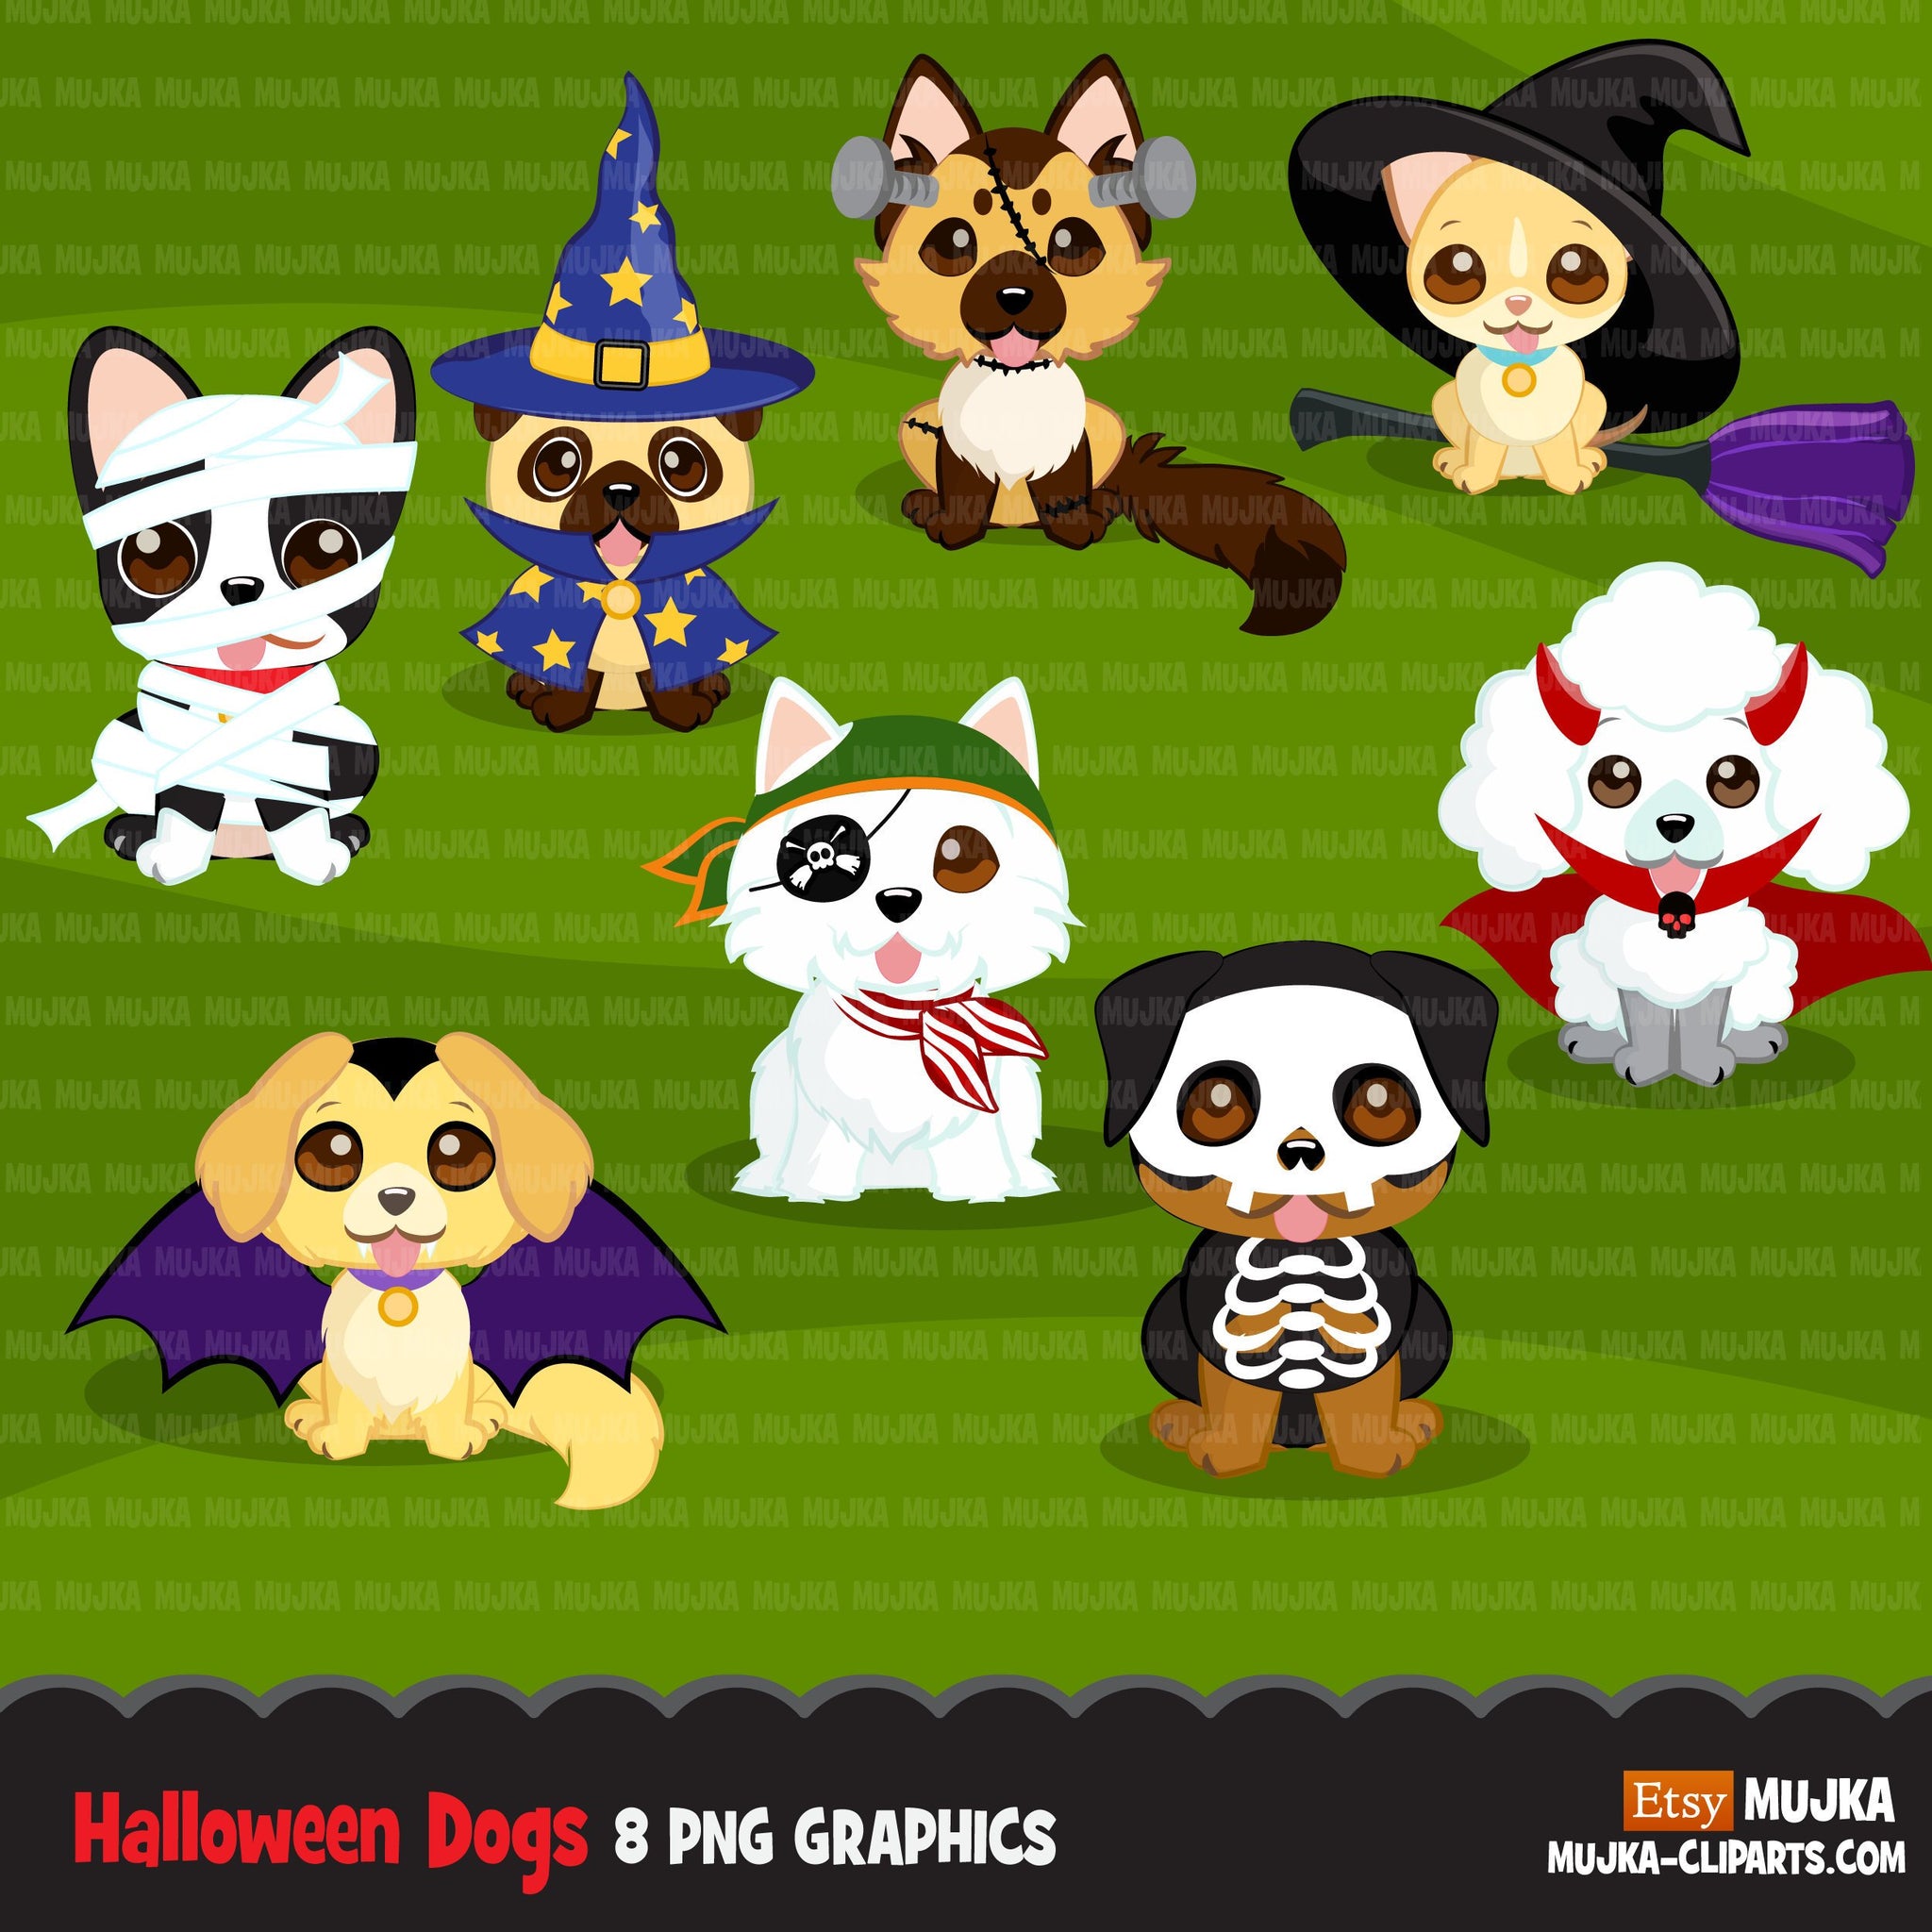 Halloween dogs clipart, terrier, shepherd, pug, trick or treat animal graphics, commercial use Sublimation digital PNG clip art